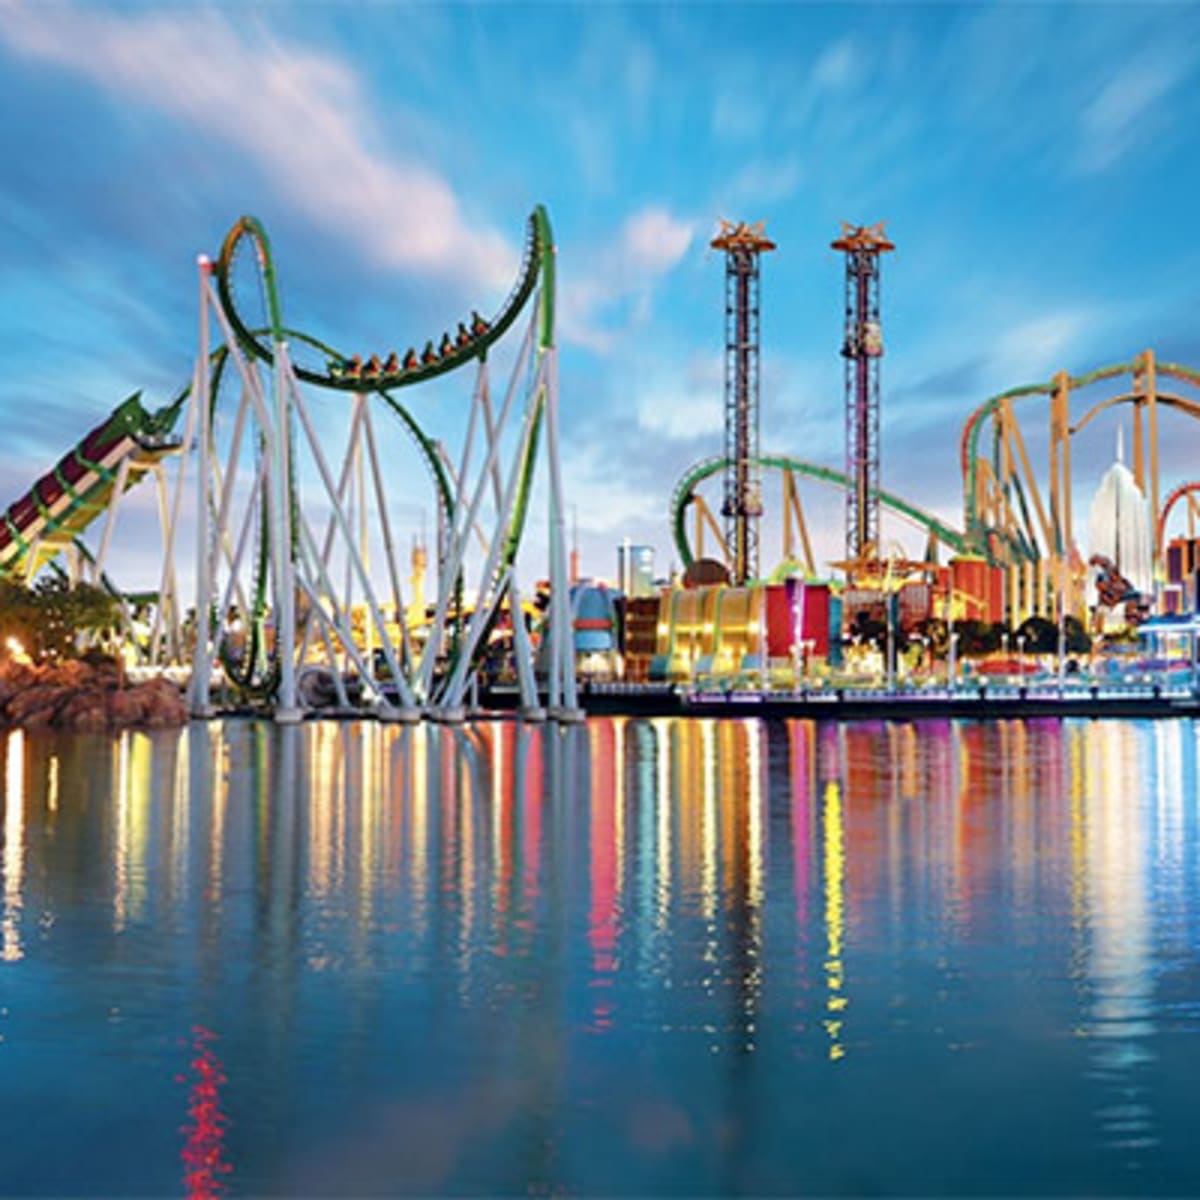 7 Best Theme Parks on the Gold Coast